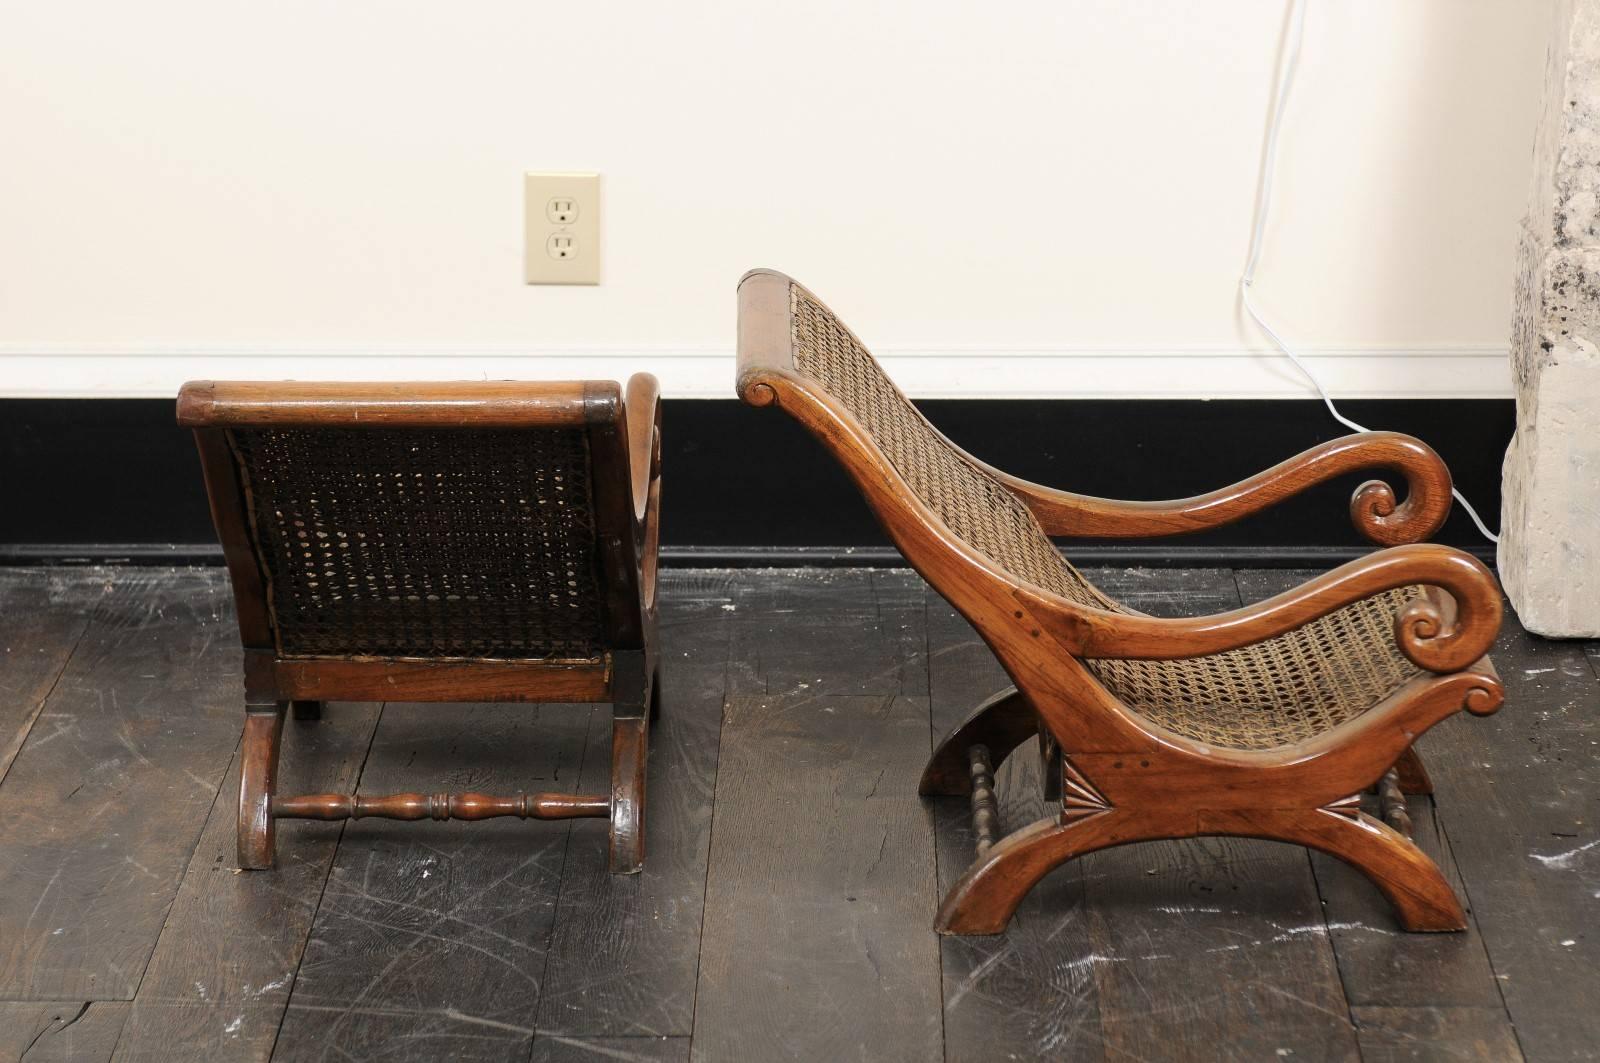 19th Century English 19th C. Children's Teak & Cane Chairs -Great Decor Accents or Display! For Sale